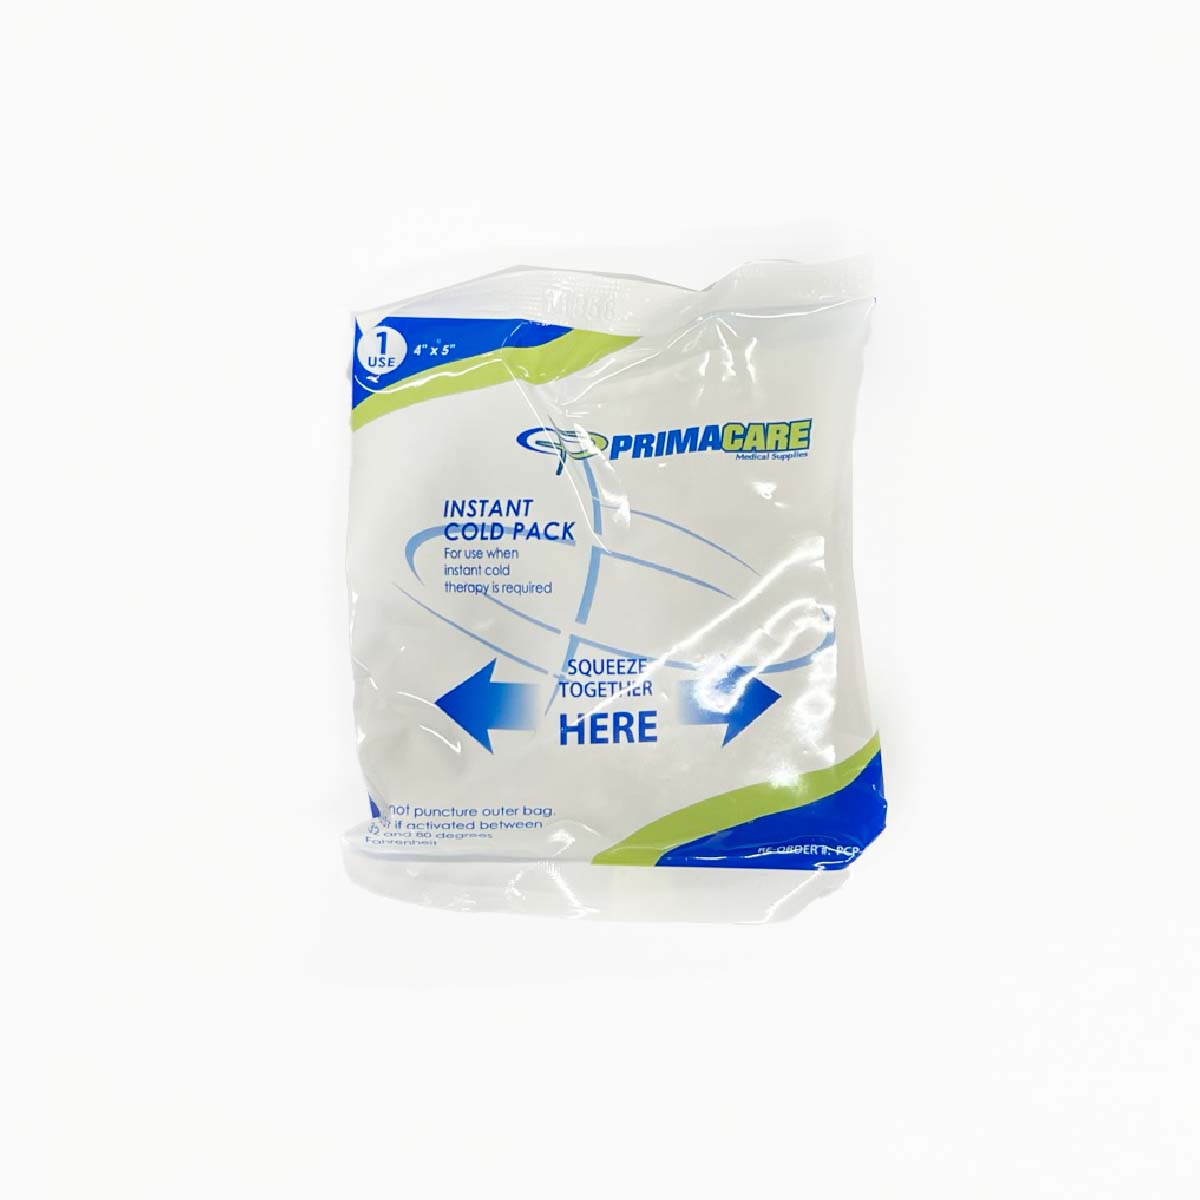 Primacare Instant Cold Pack, 4x5"